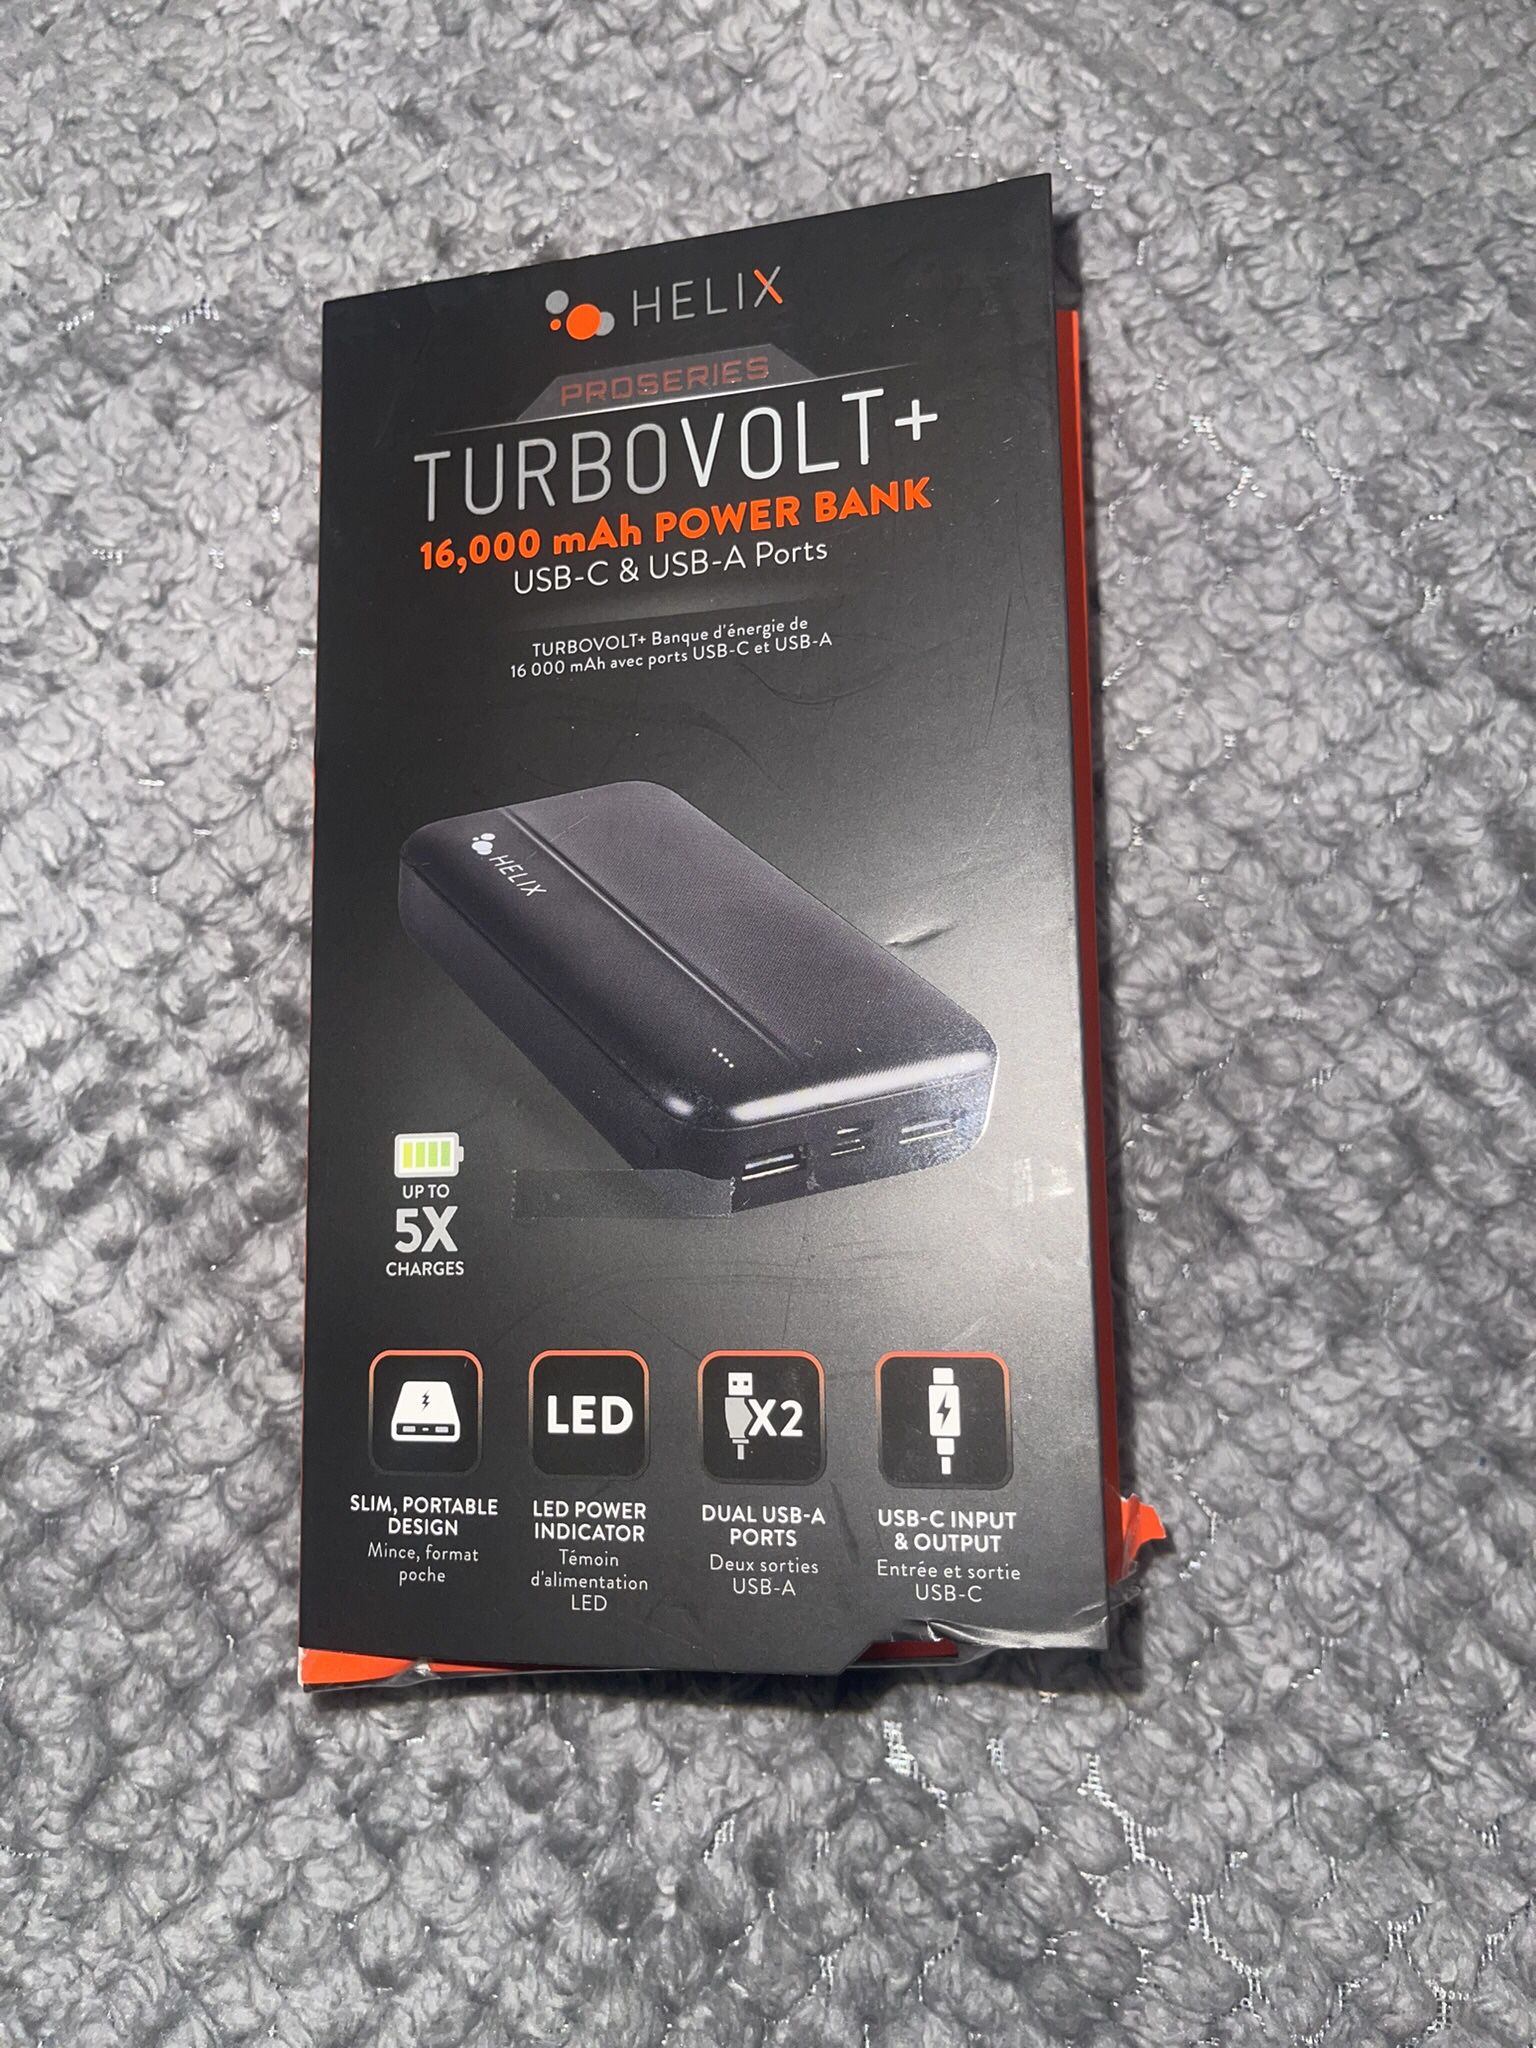 New Helix Turbo Volt+ 16,000 mAh Power Bank with USB-C and Dual USB-A Ports, Black